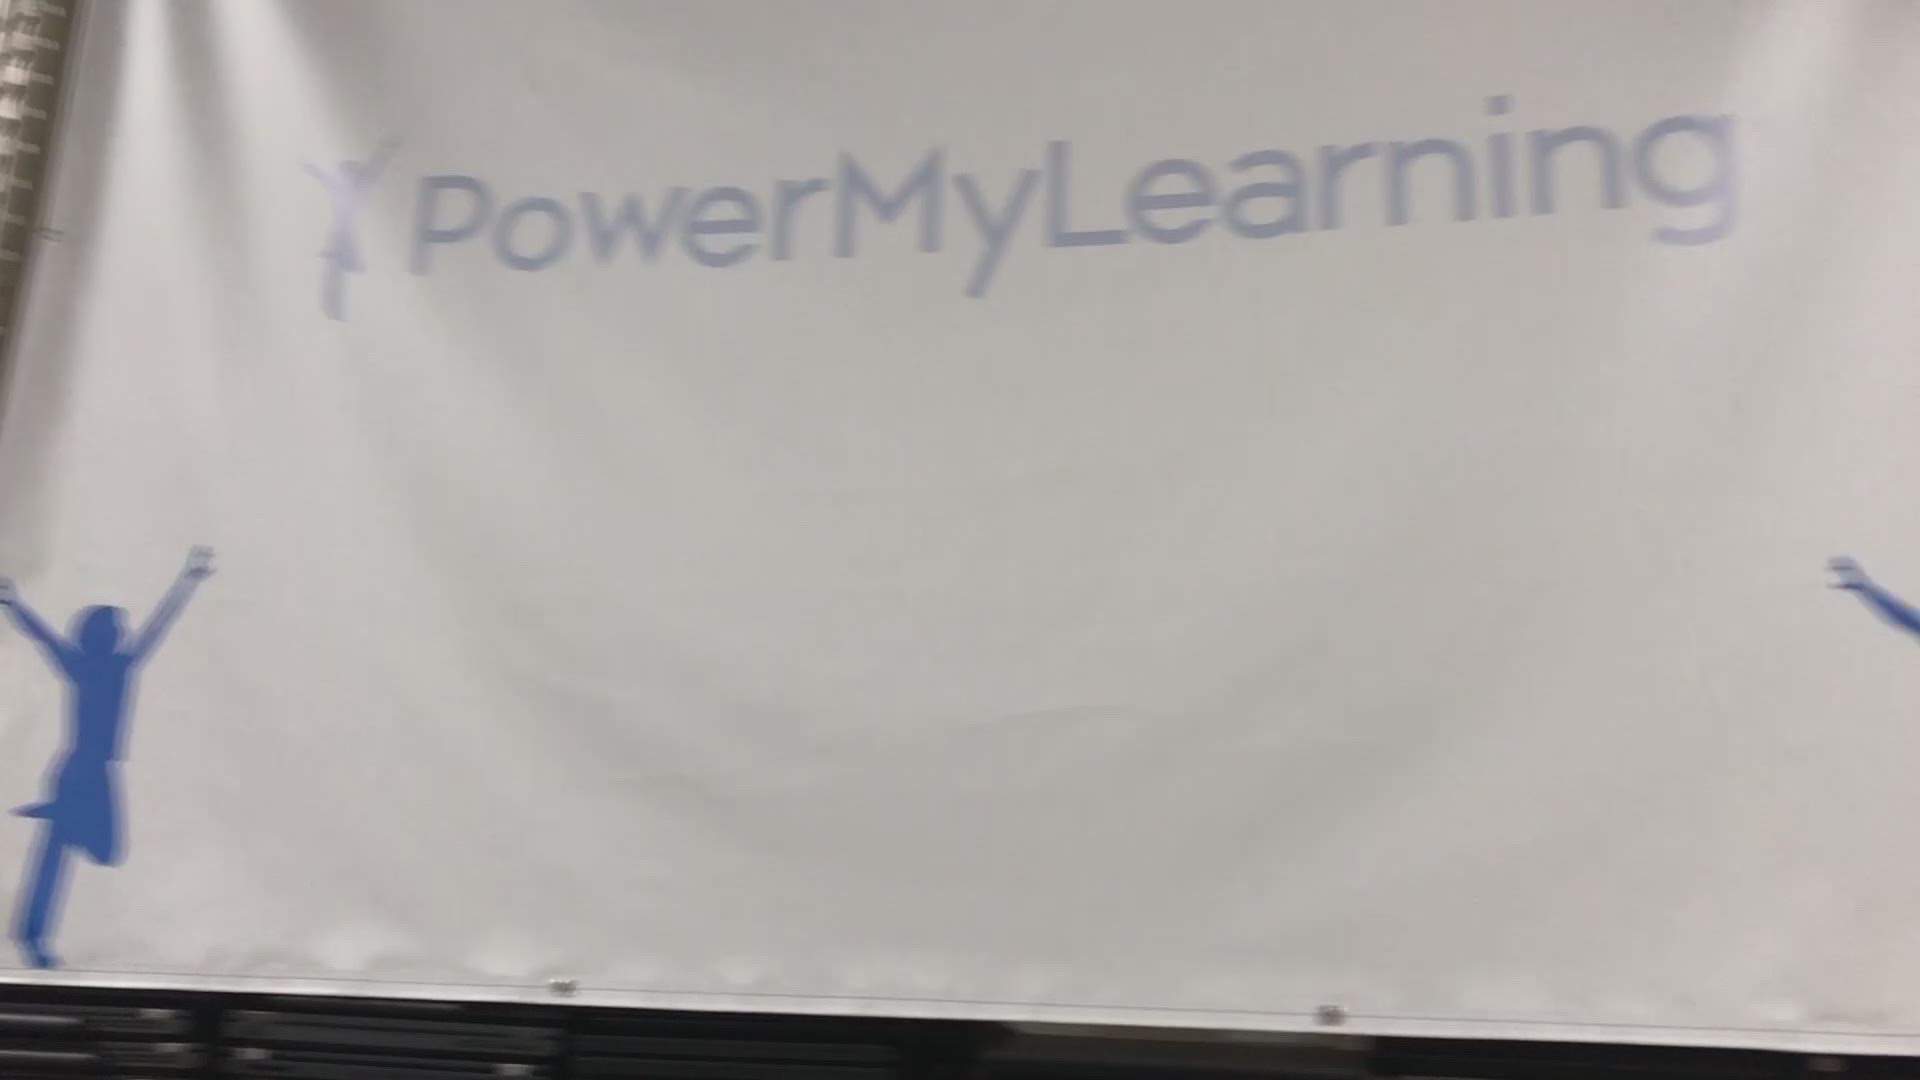 PowerMyLearning along with CGI Consulting sponsors pilot computer coding class on the Southside